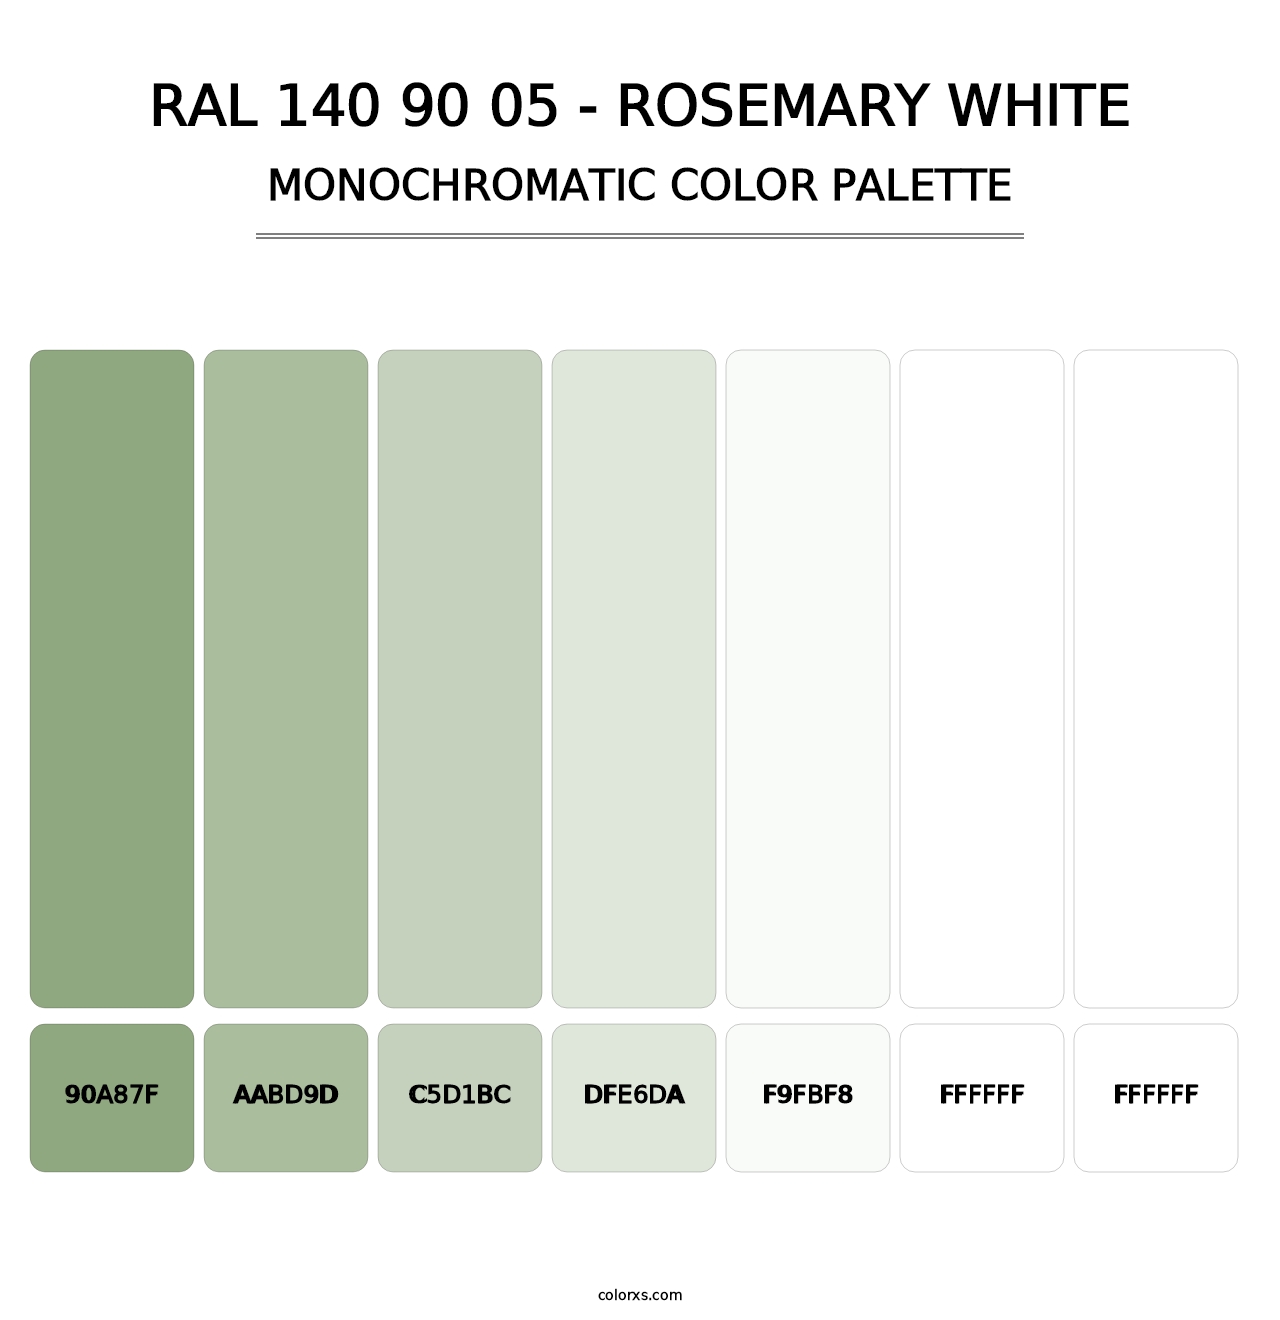 RAL 140 90 05 - Rosemary White - Monochromatic Color Palette